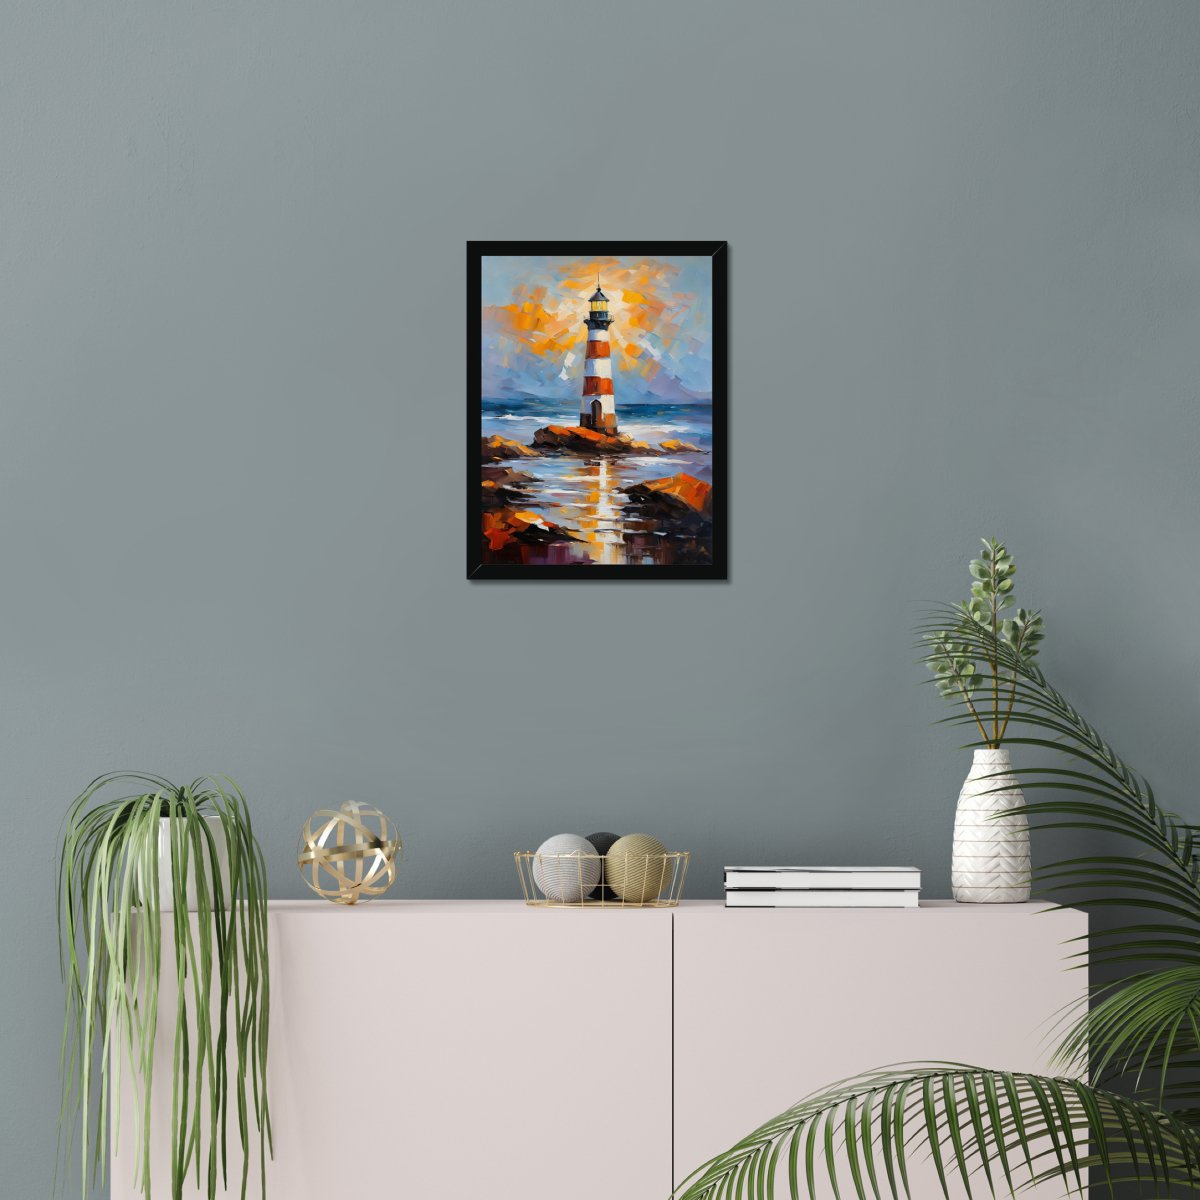 Beacon of hope - Art print - Poster - Ever colorful